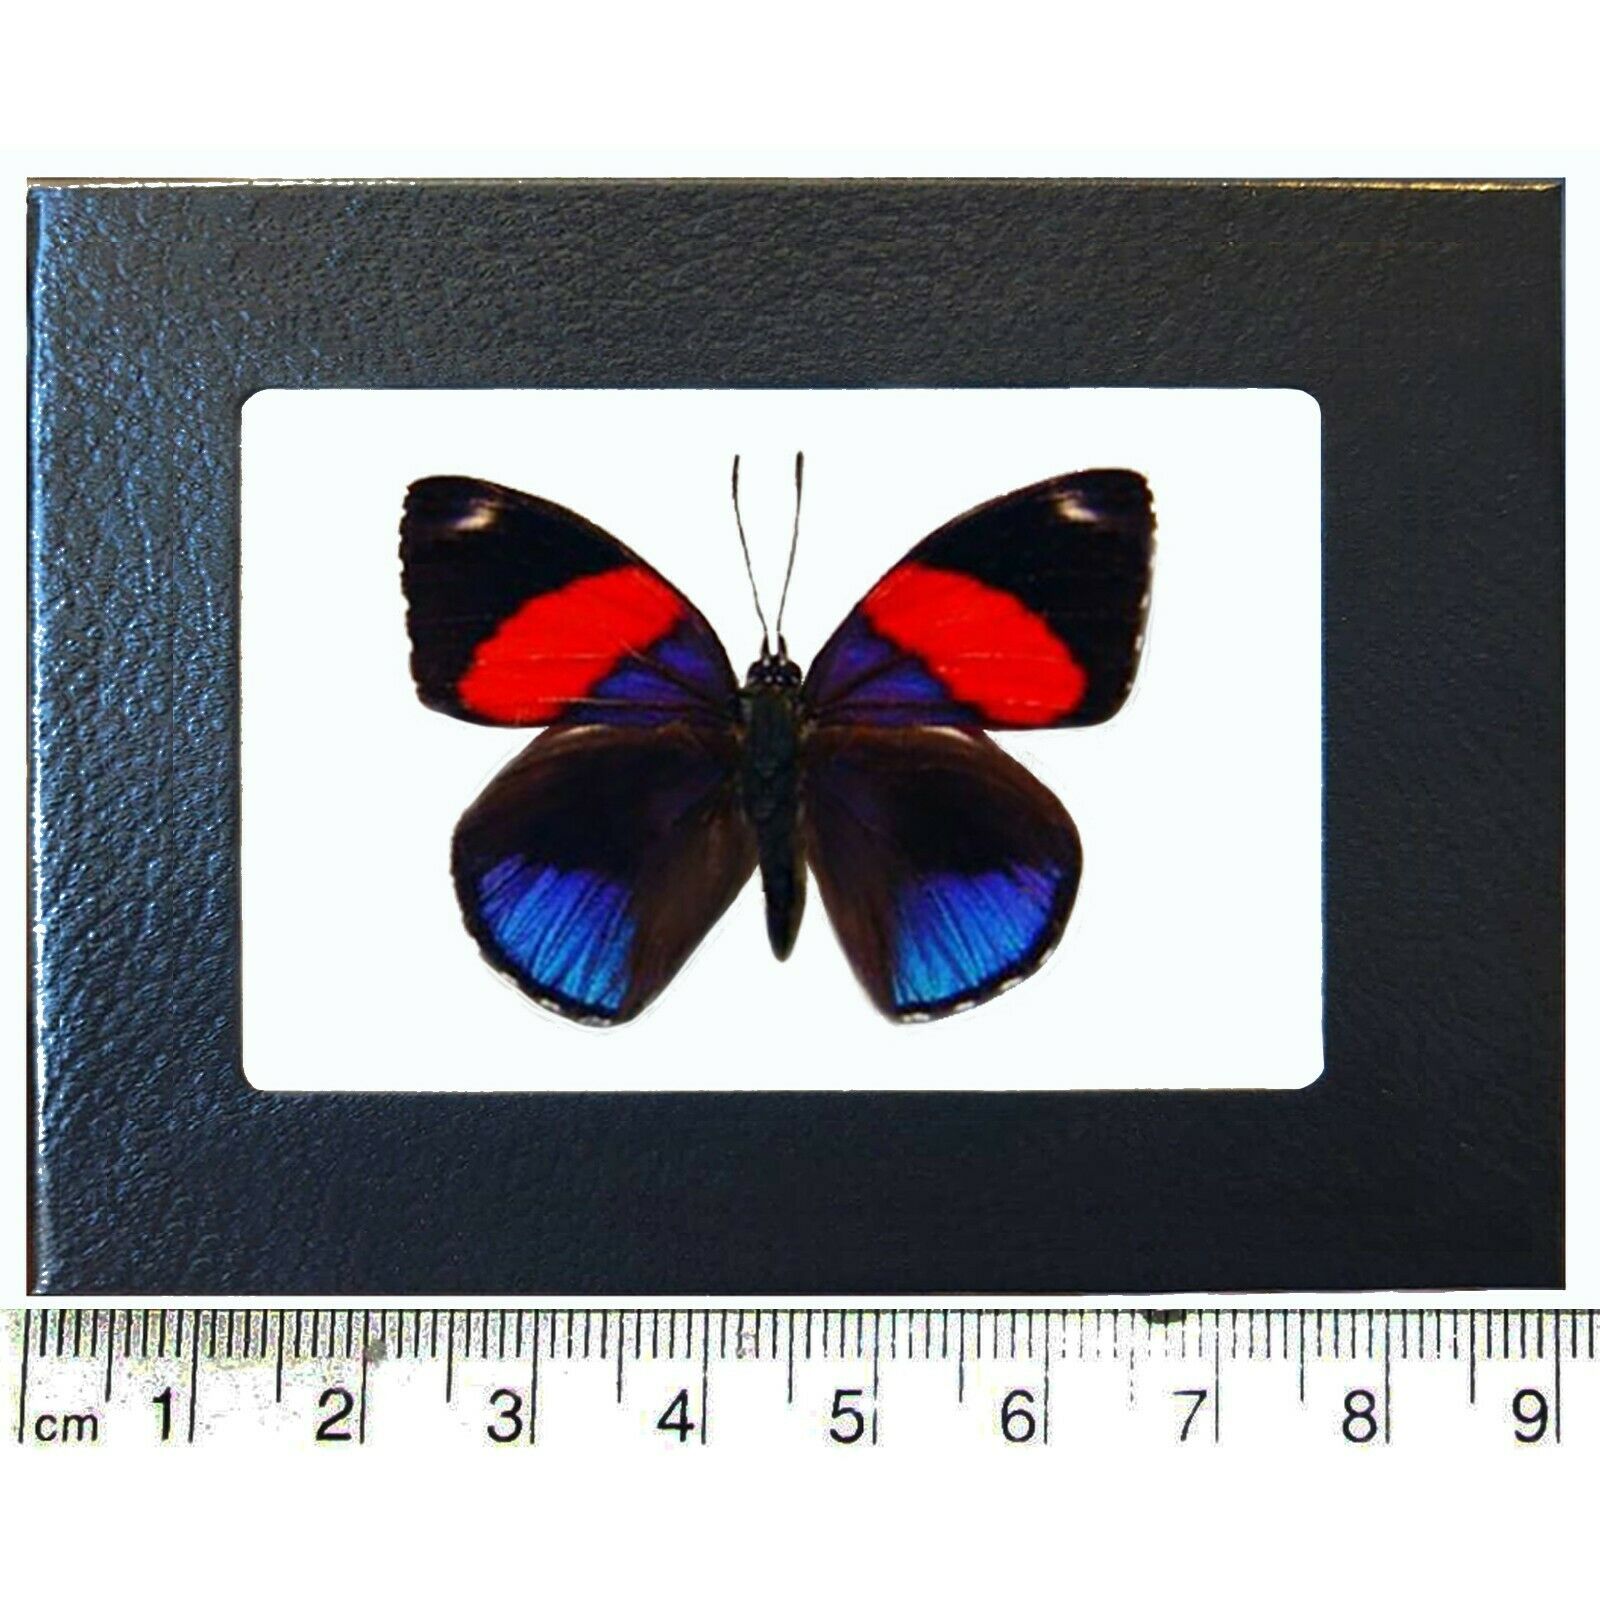 Callicore hystaspes pink red blue butterfly Peru